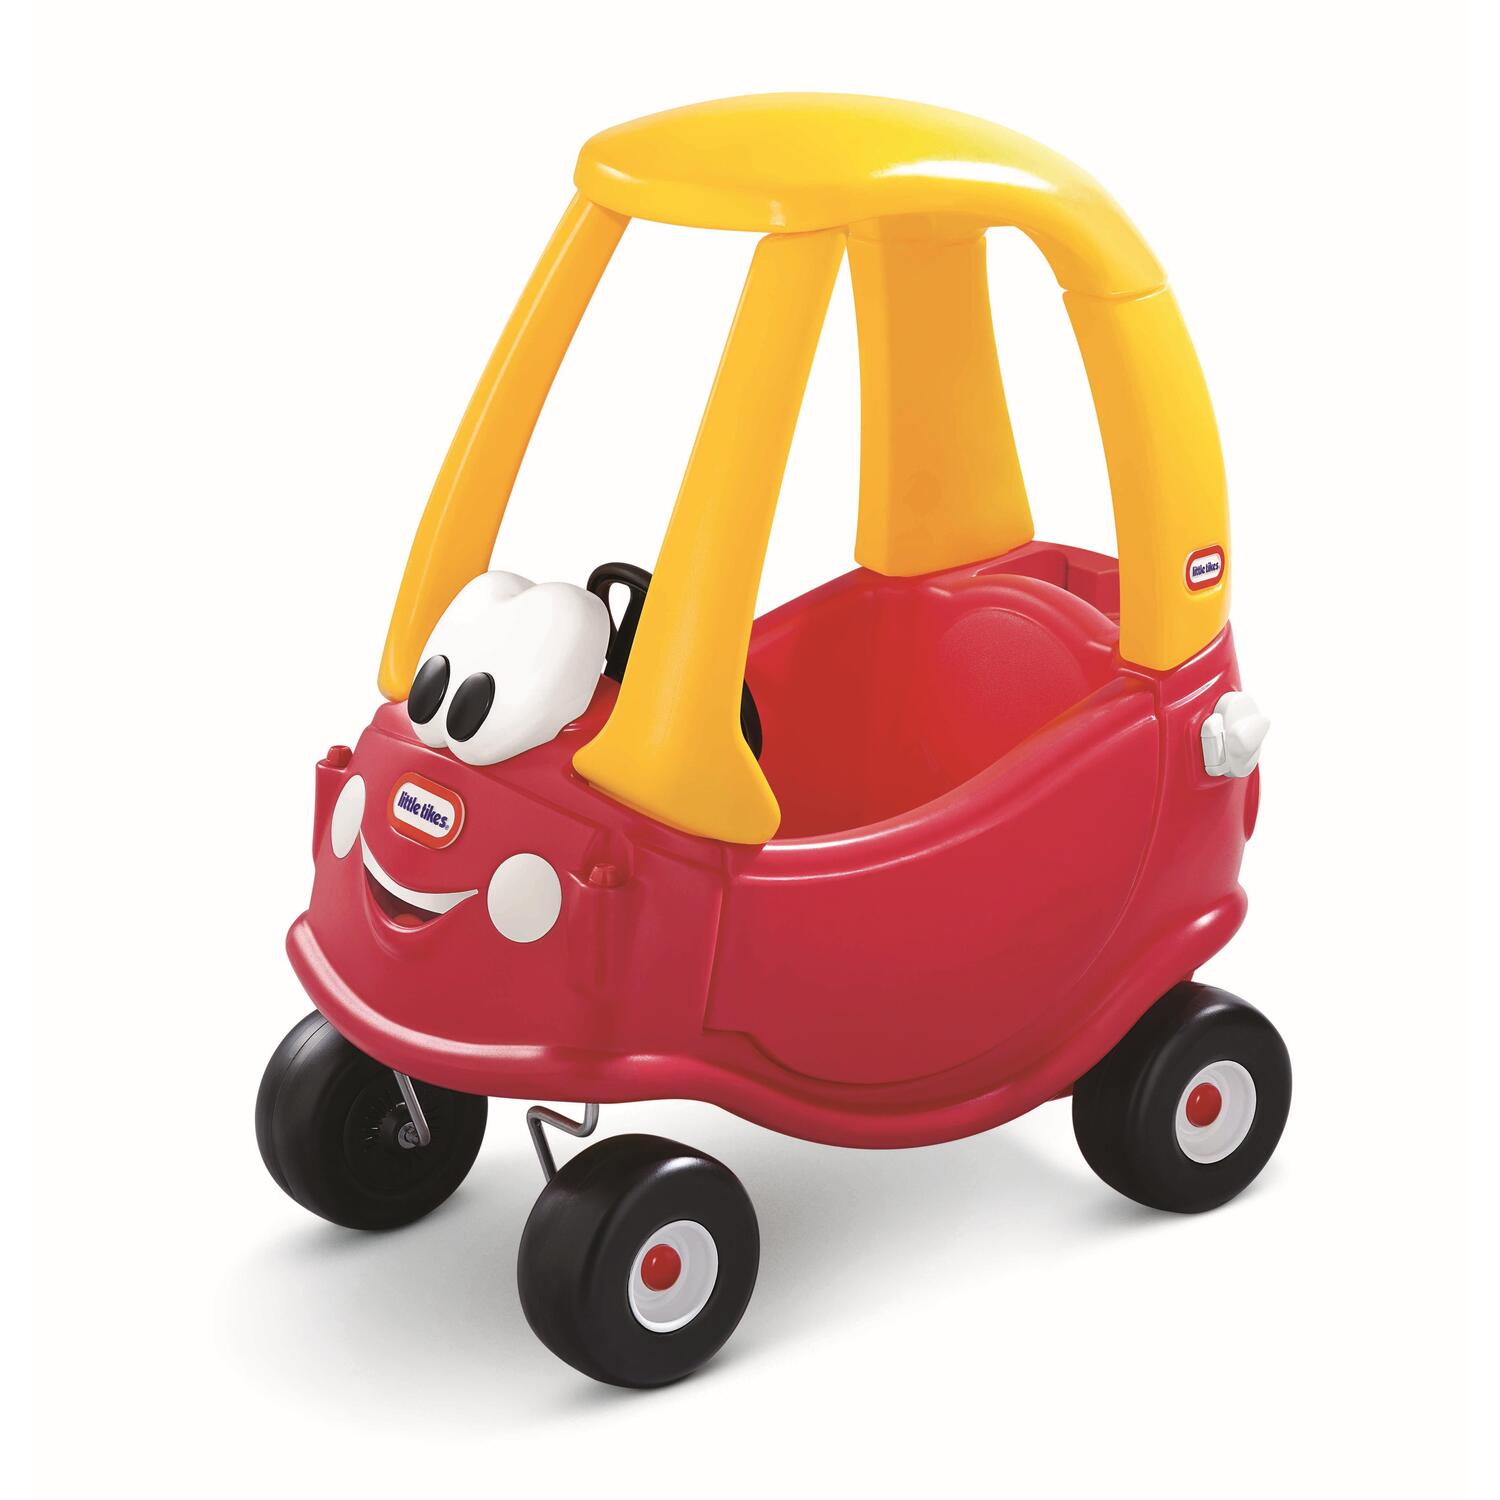 Little Tikes Cozy Coupe 30th Anniversary Edition Ride on - image 1 of 11